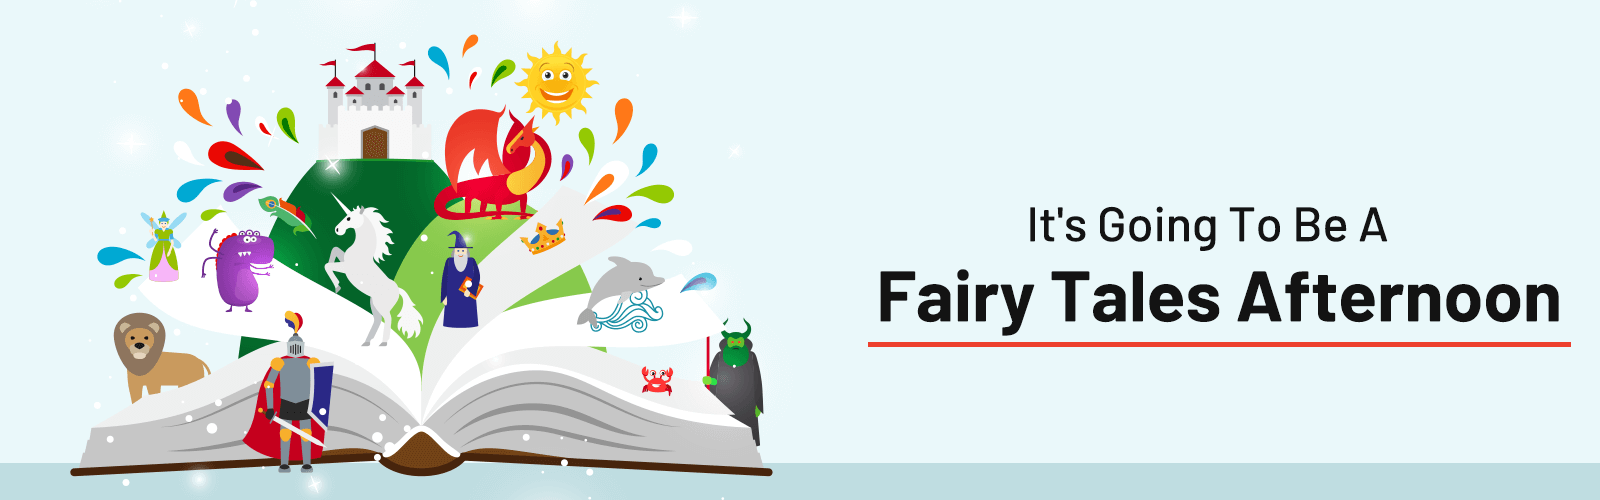 It's Going To Be A Fairy Tales Afternoon - CGR International School - Best School in Madhapur / Hyderabad